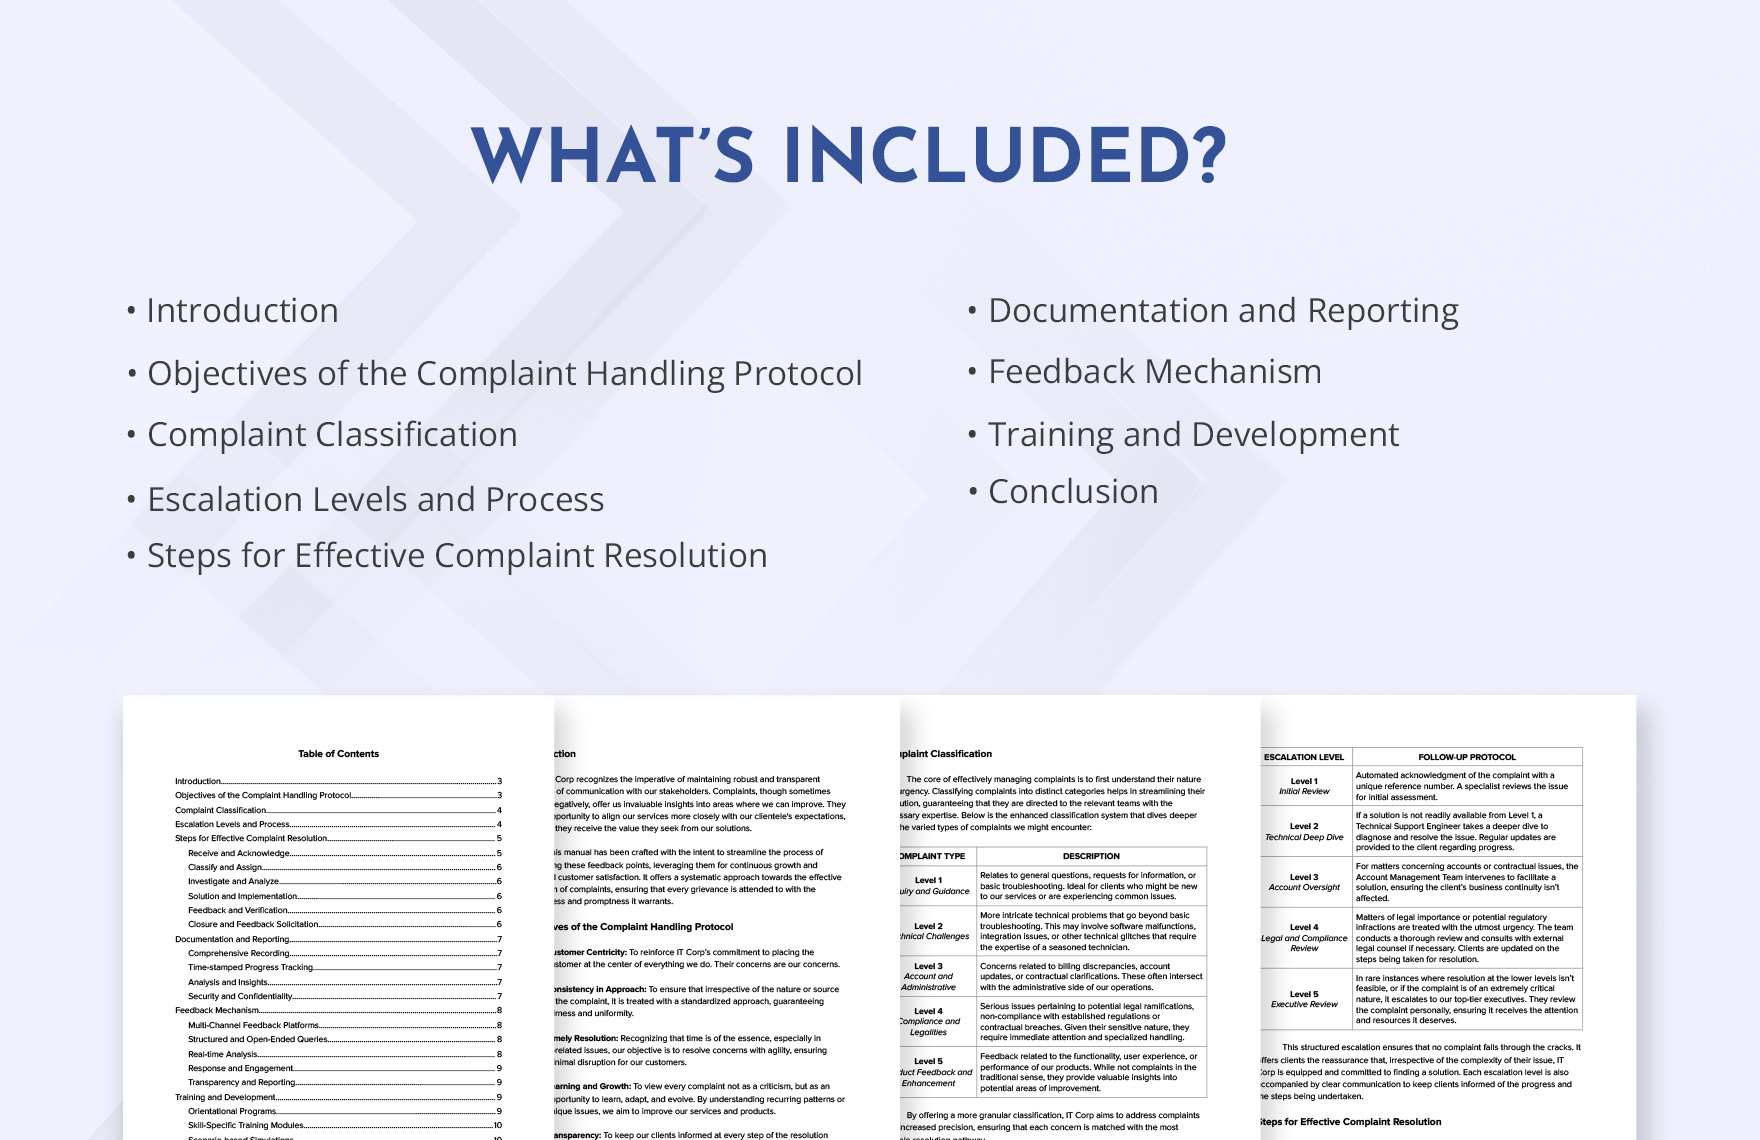 IT Complaint Escalation and Handling Protocol Manual Template